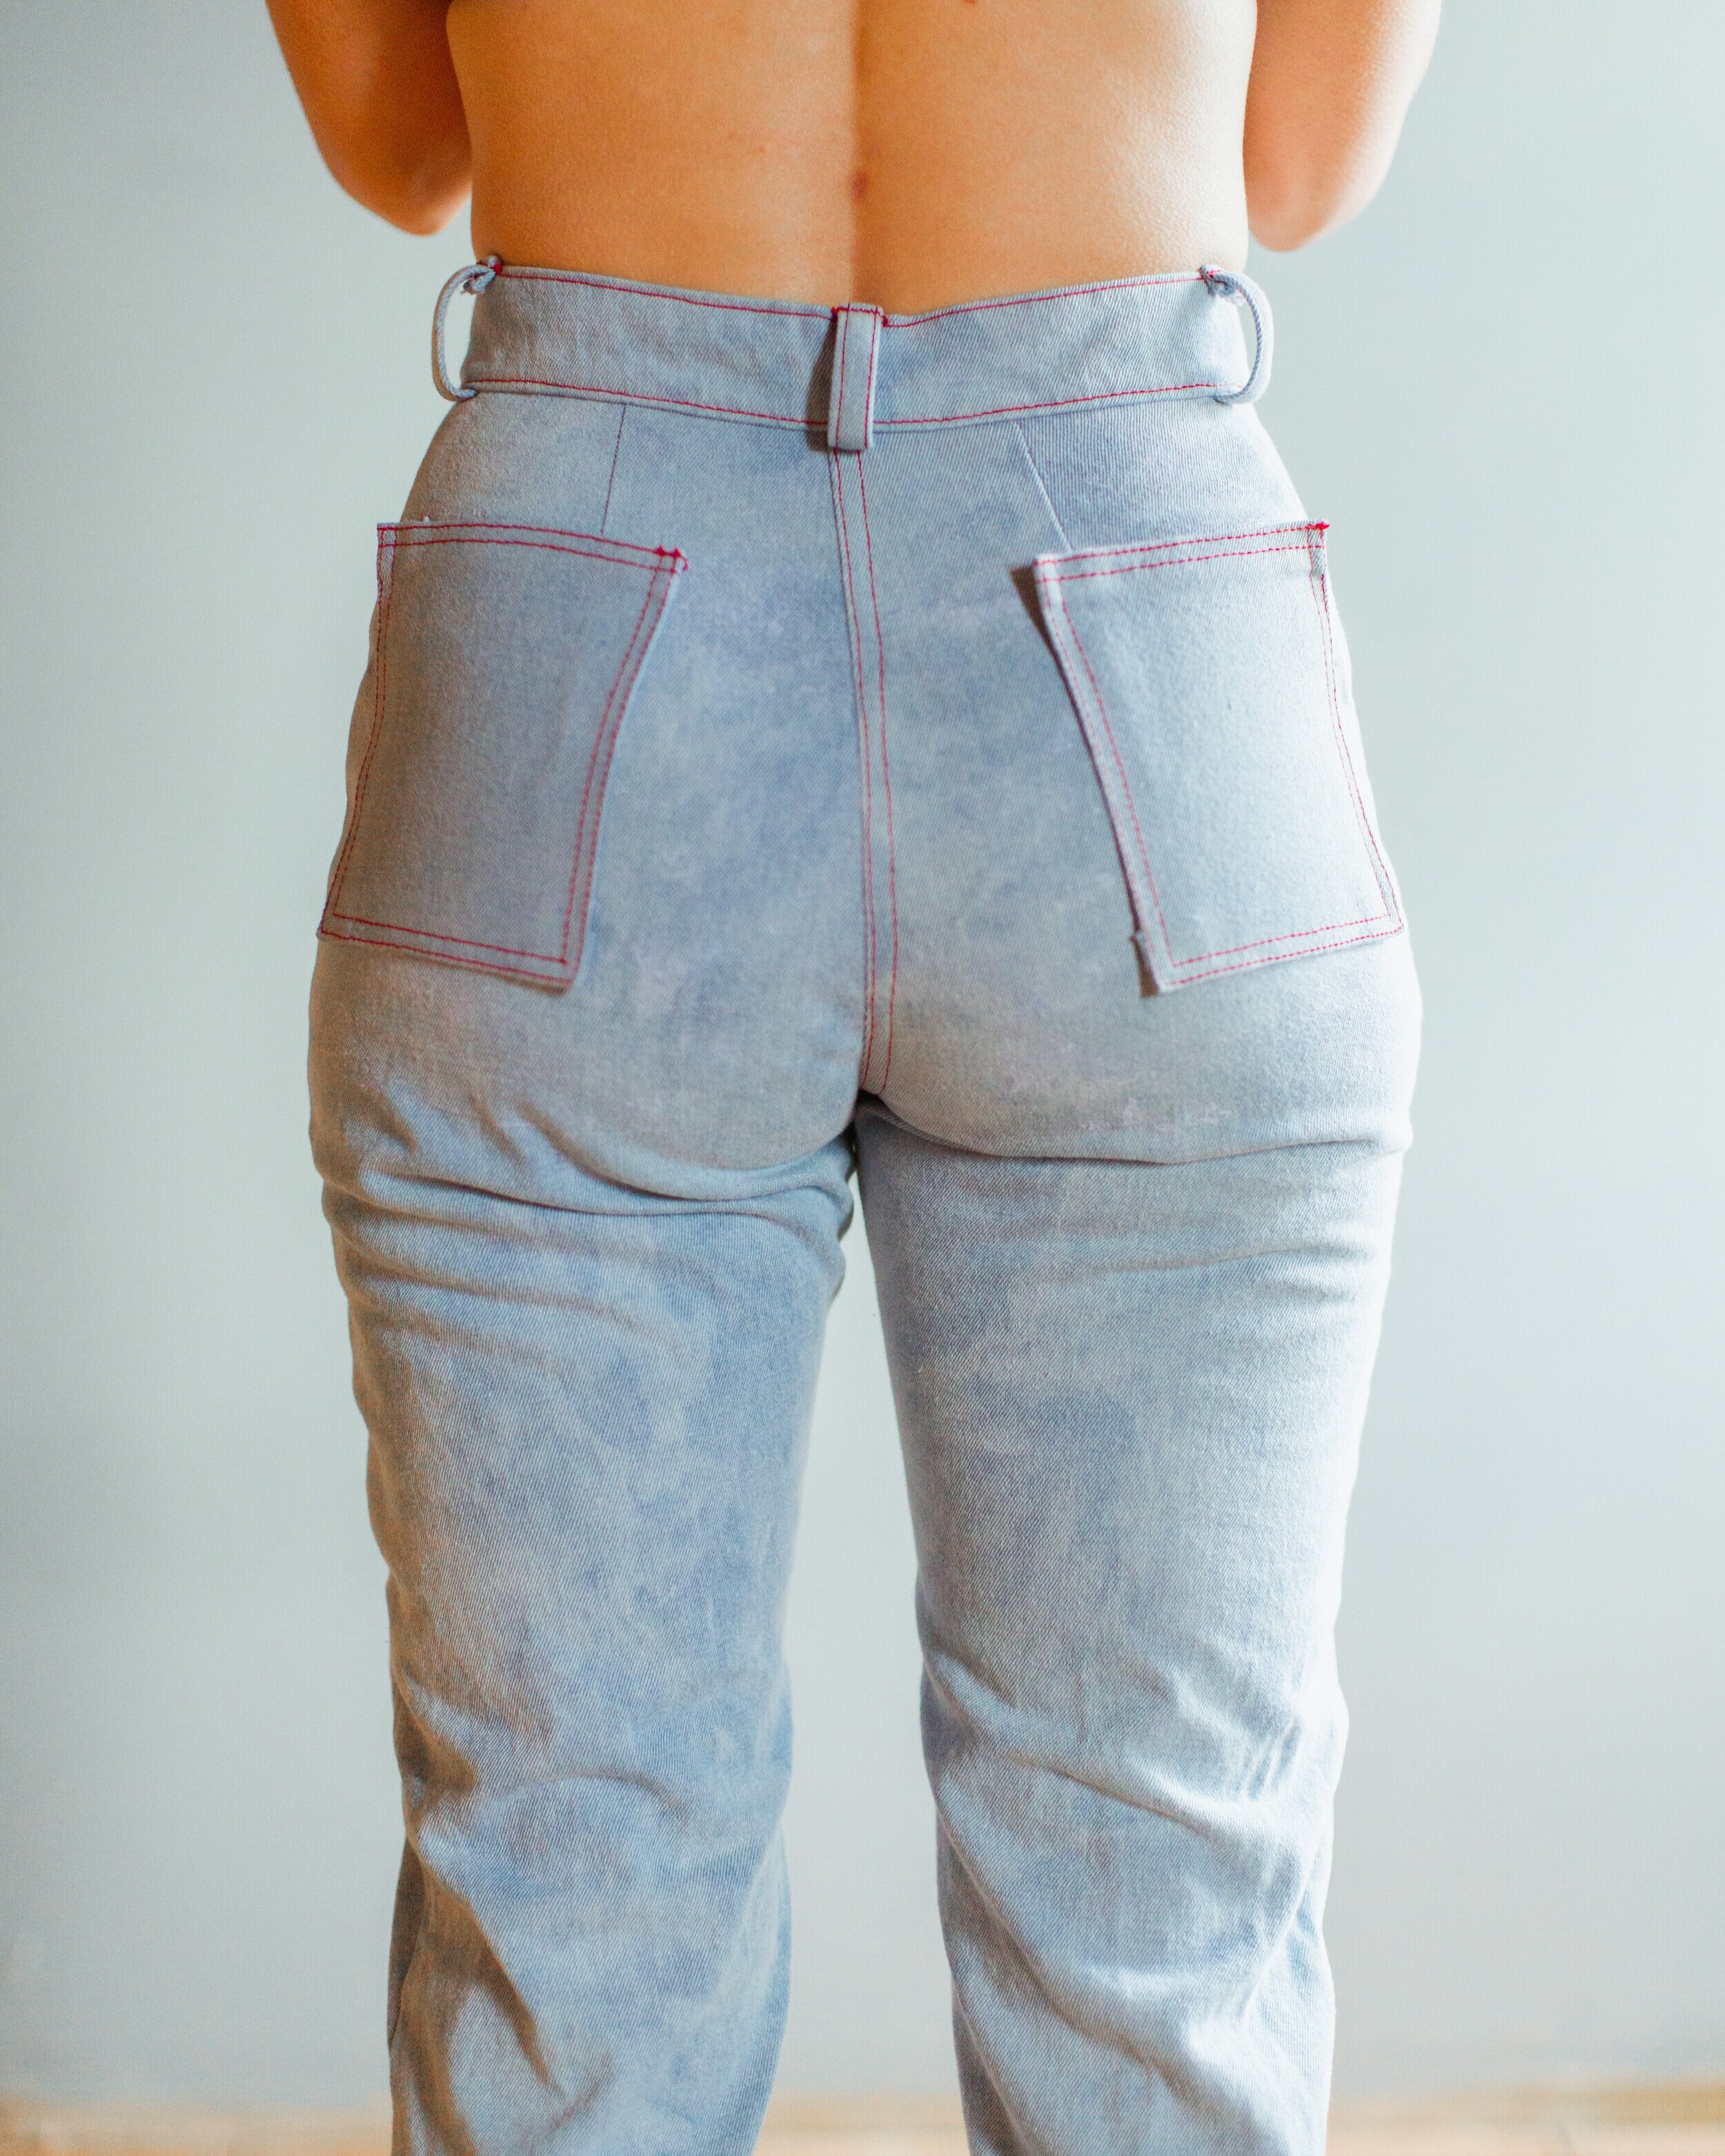 How to make your bum look bigger in jeans // House of Peach